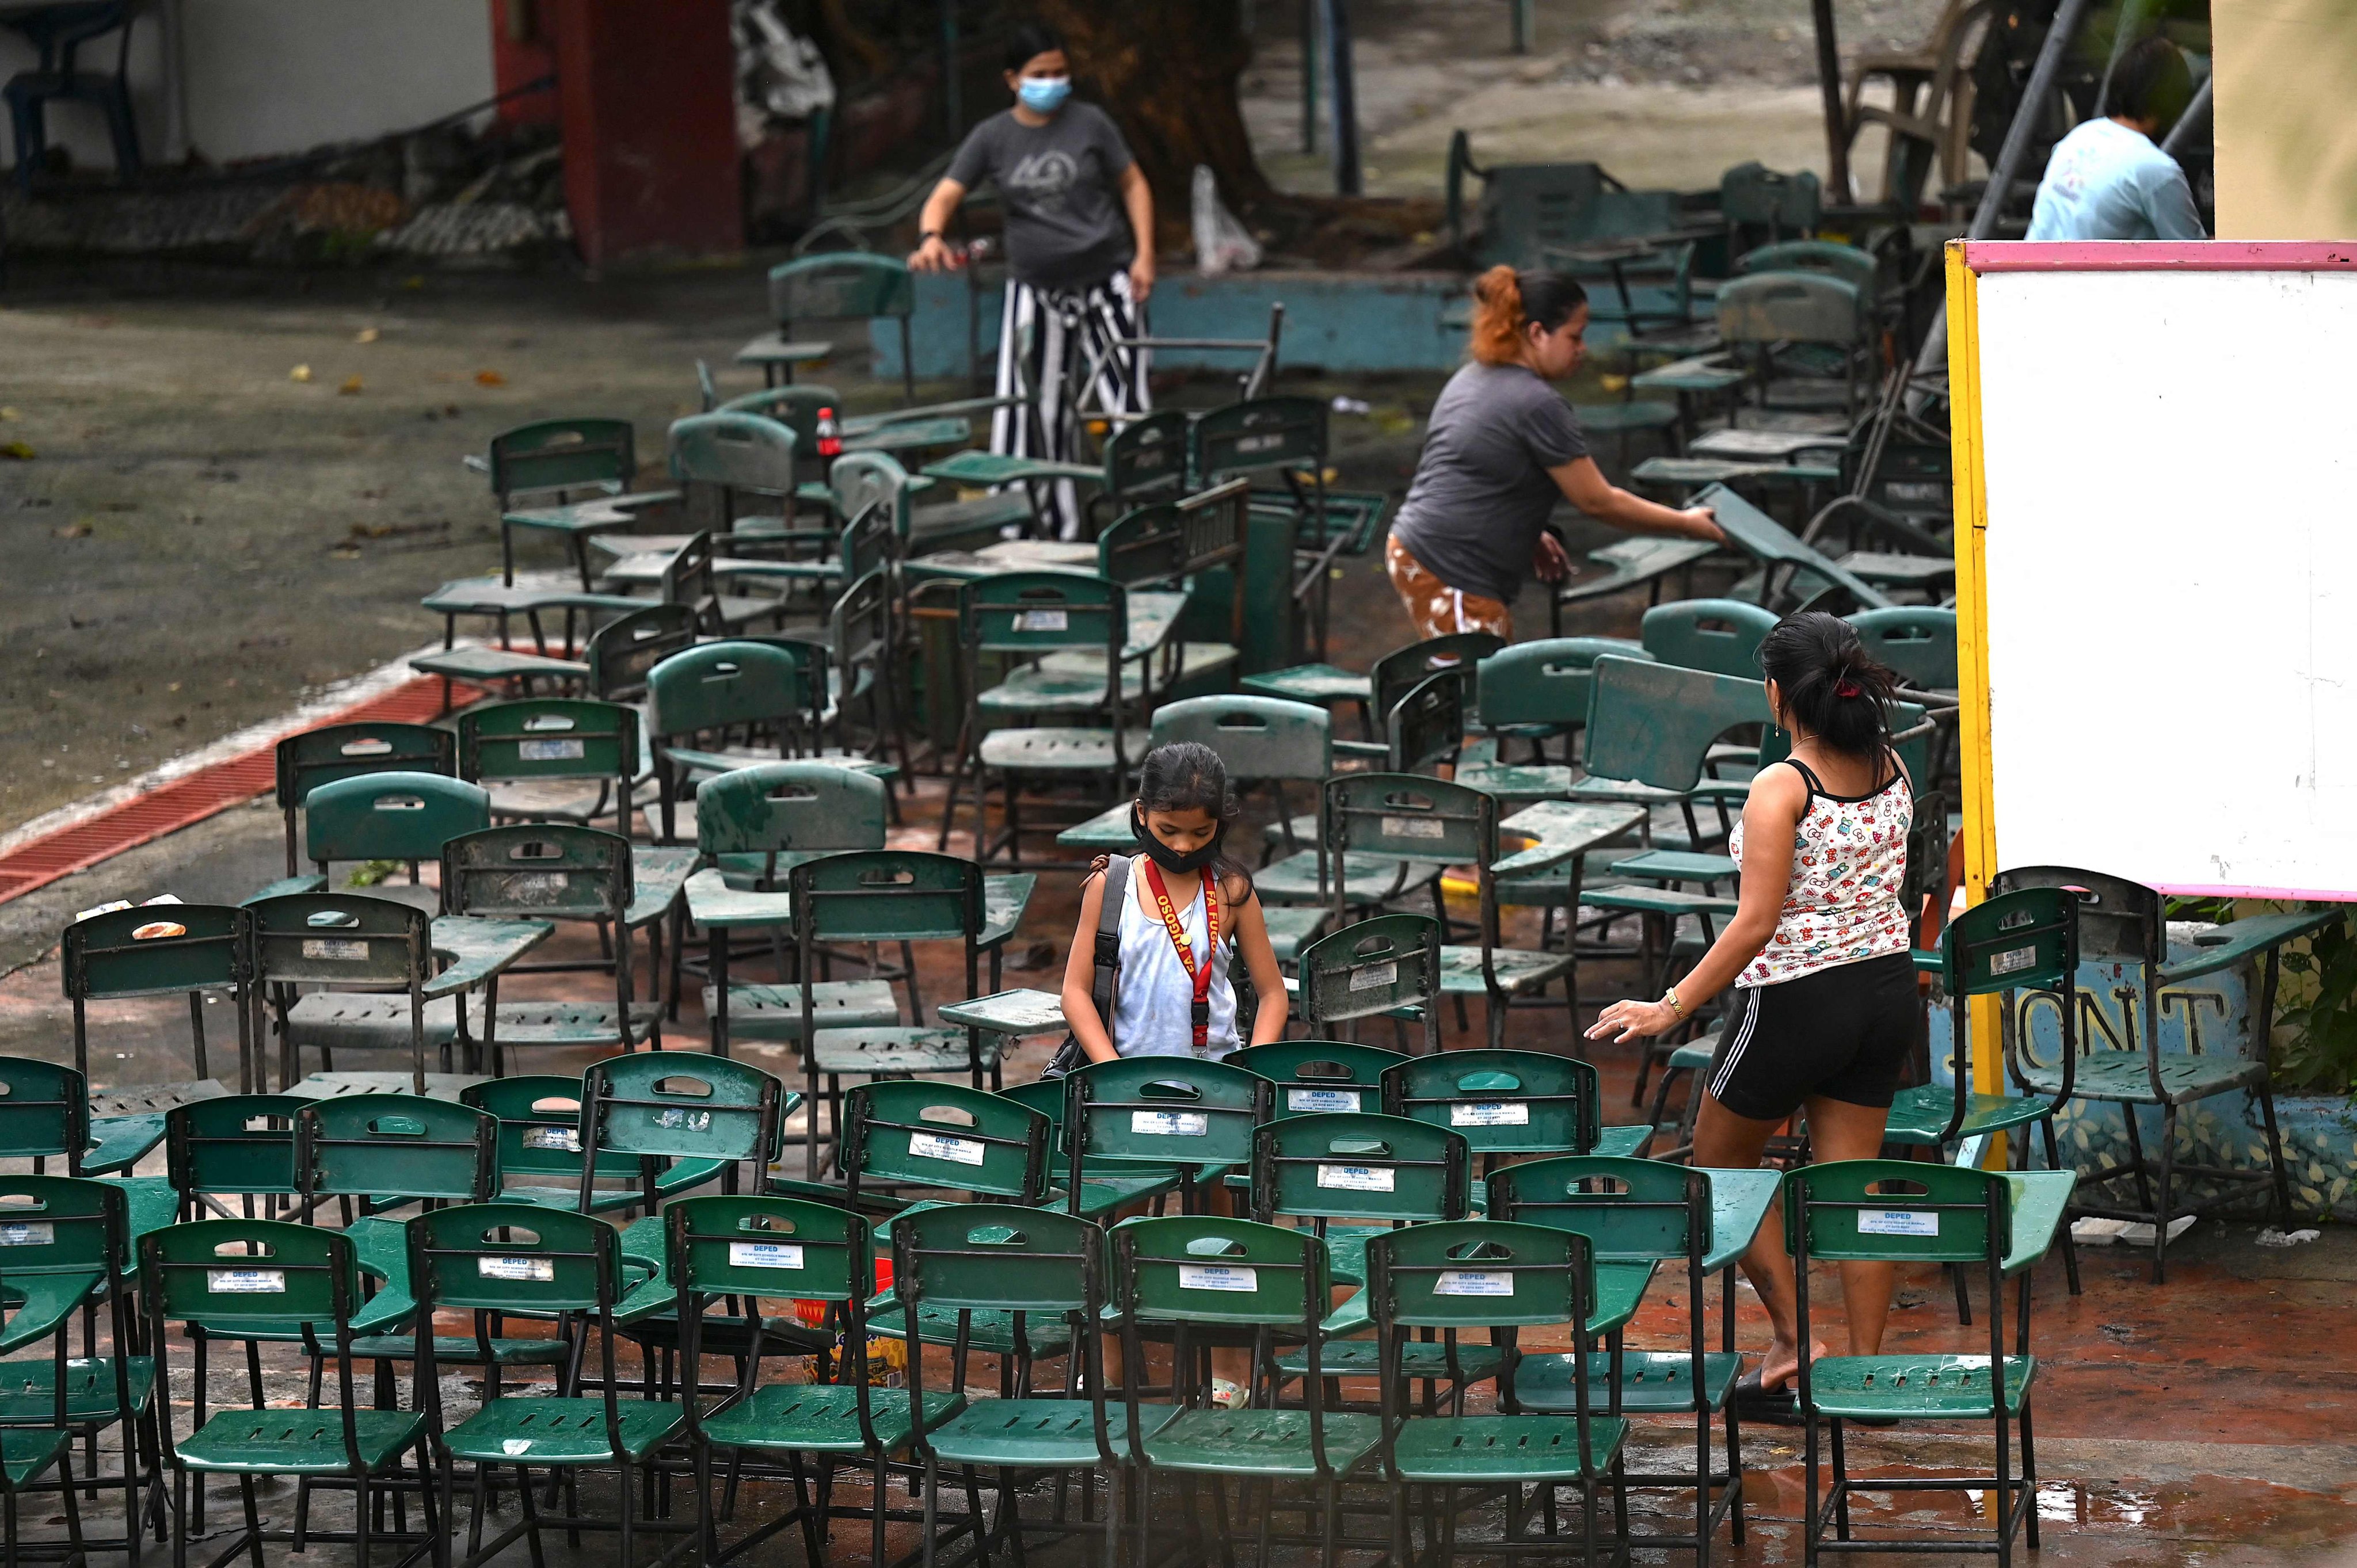 Volunteers scrub chairs as they clean classrooms at a school in Manila, Philippines, on August 5. Photo: AFP